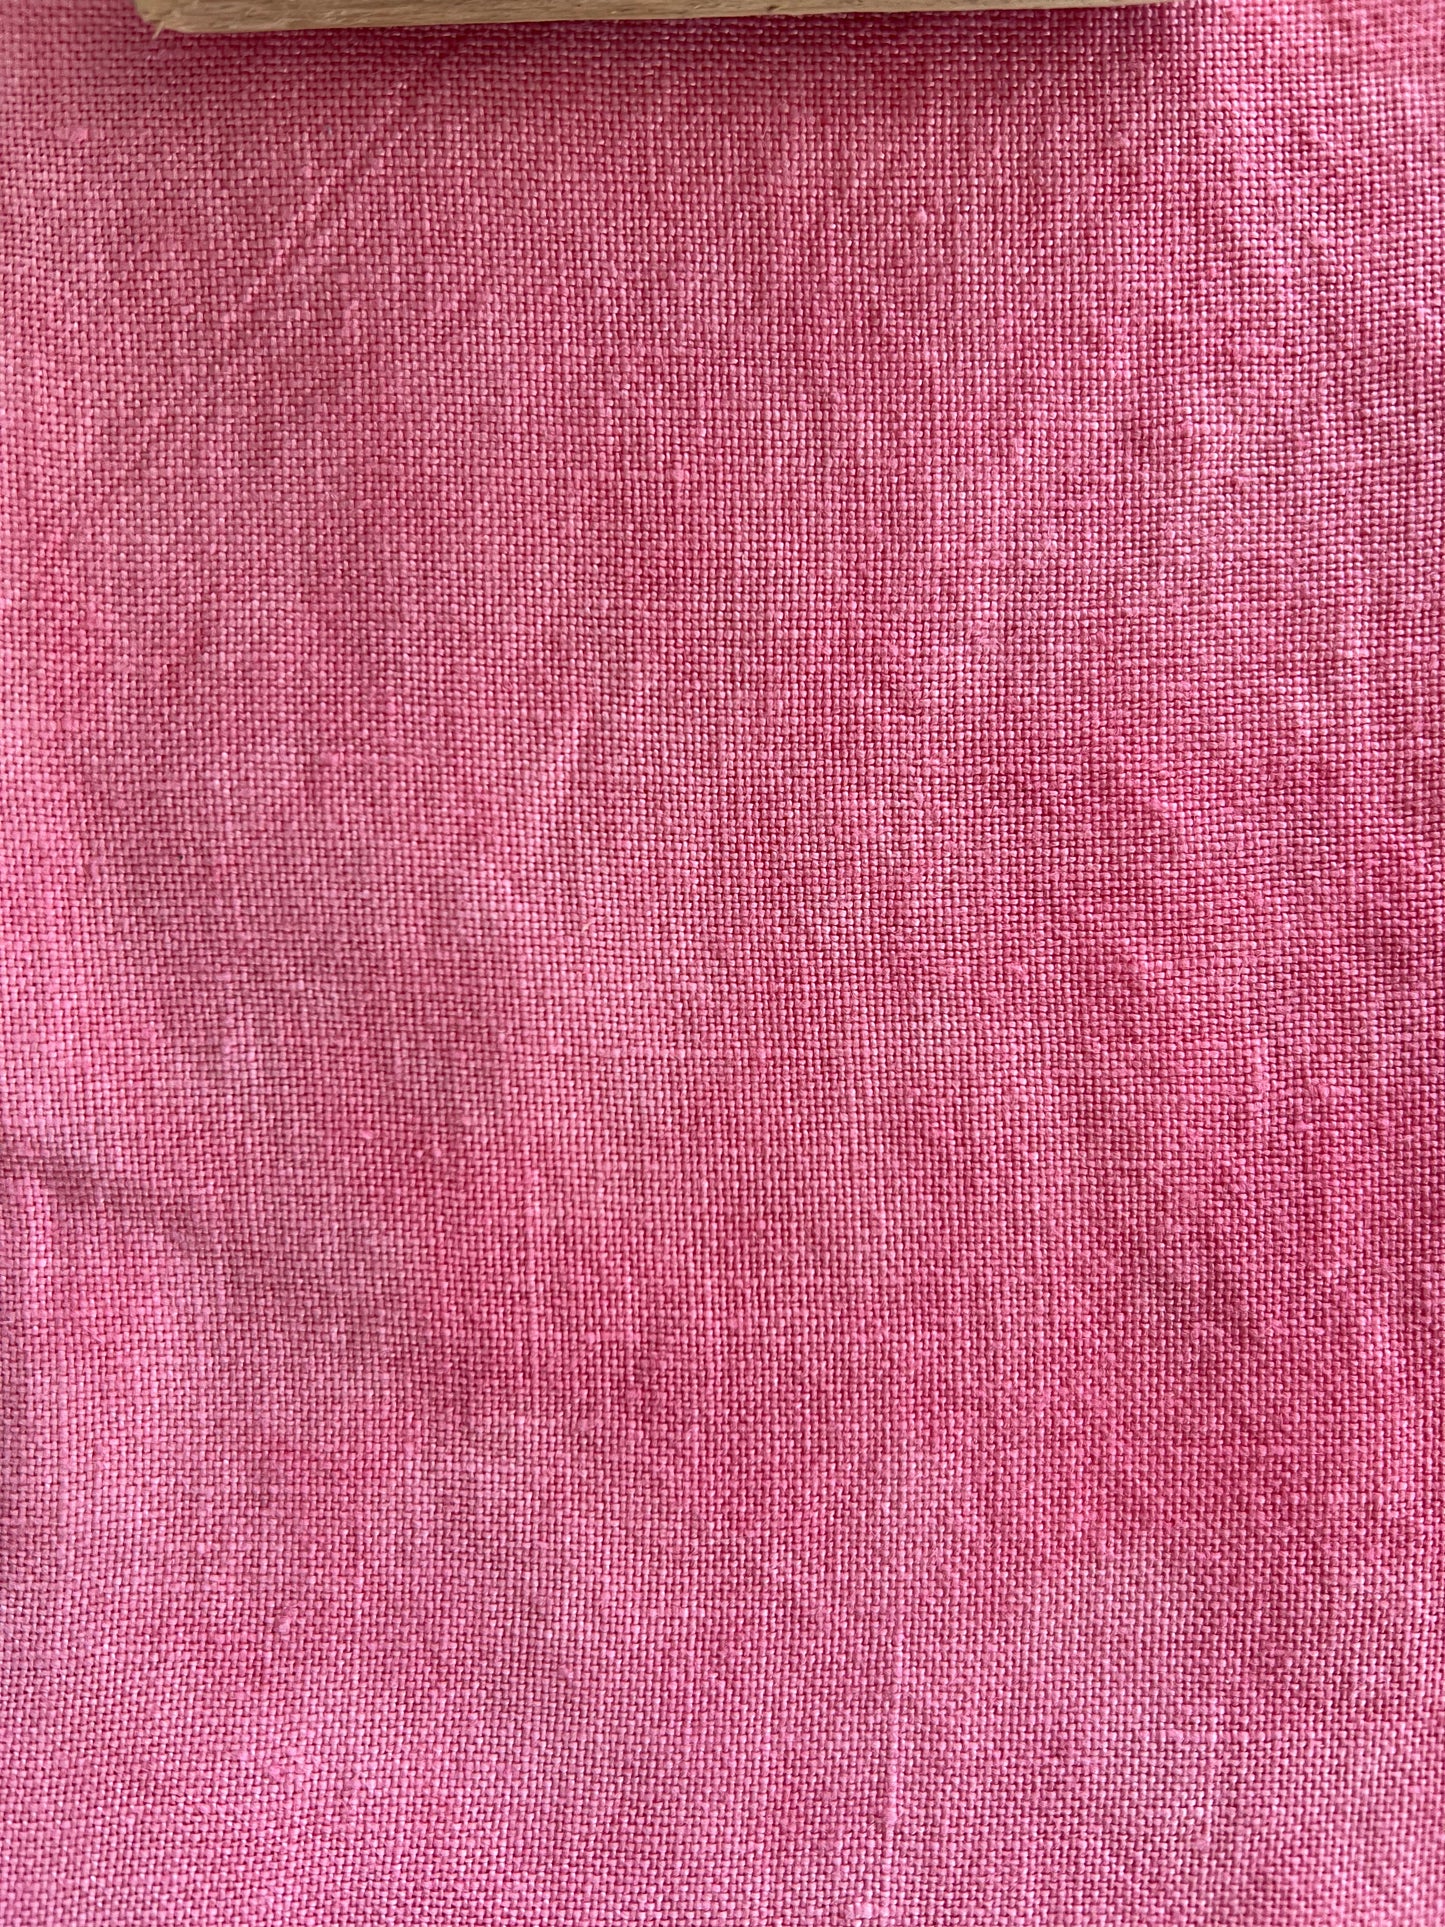 32 Count Linen 'Peppermint Nob' Hand Dyed Cross Stitch Fabric